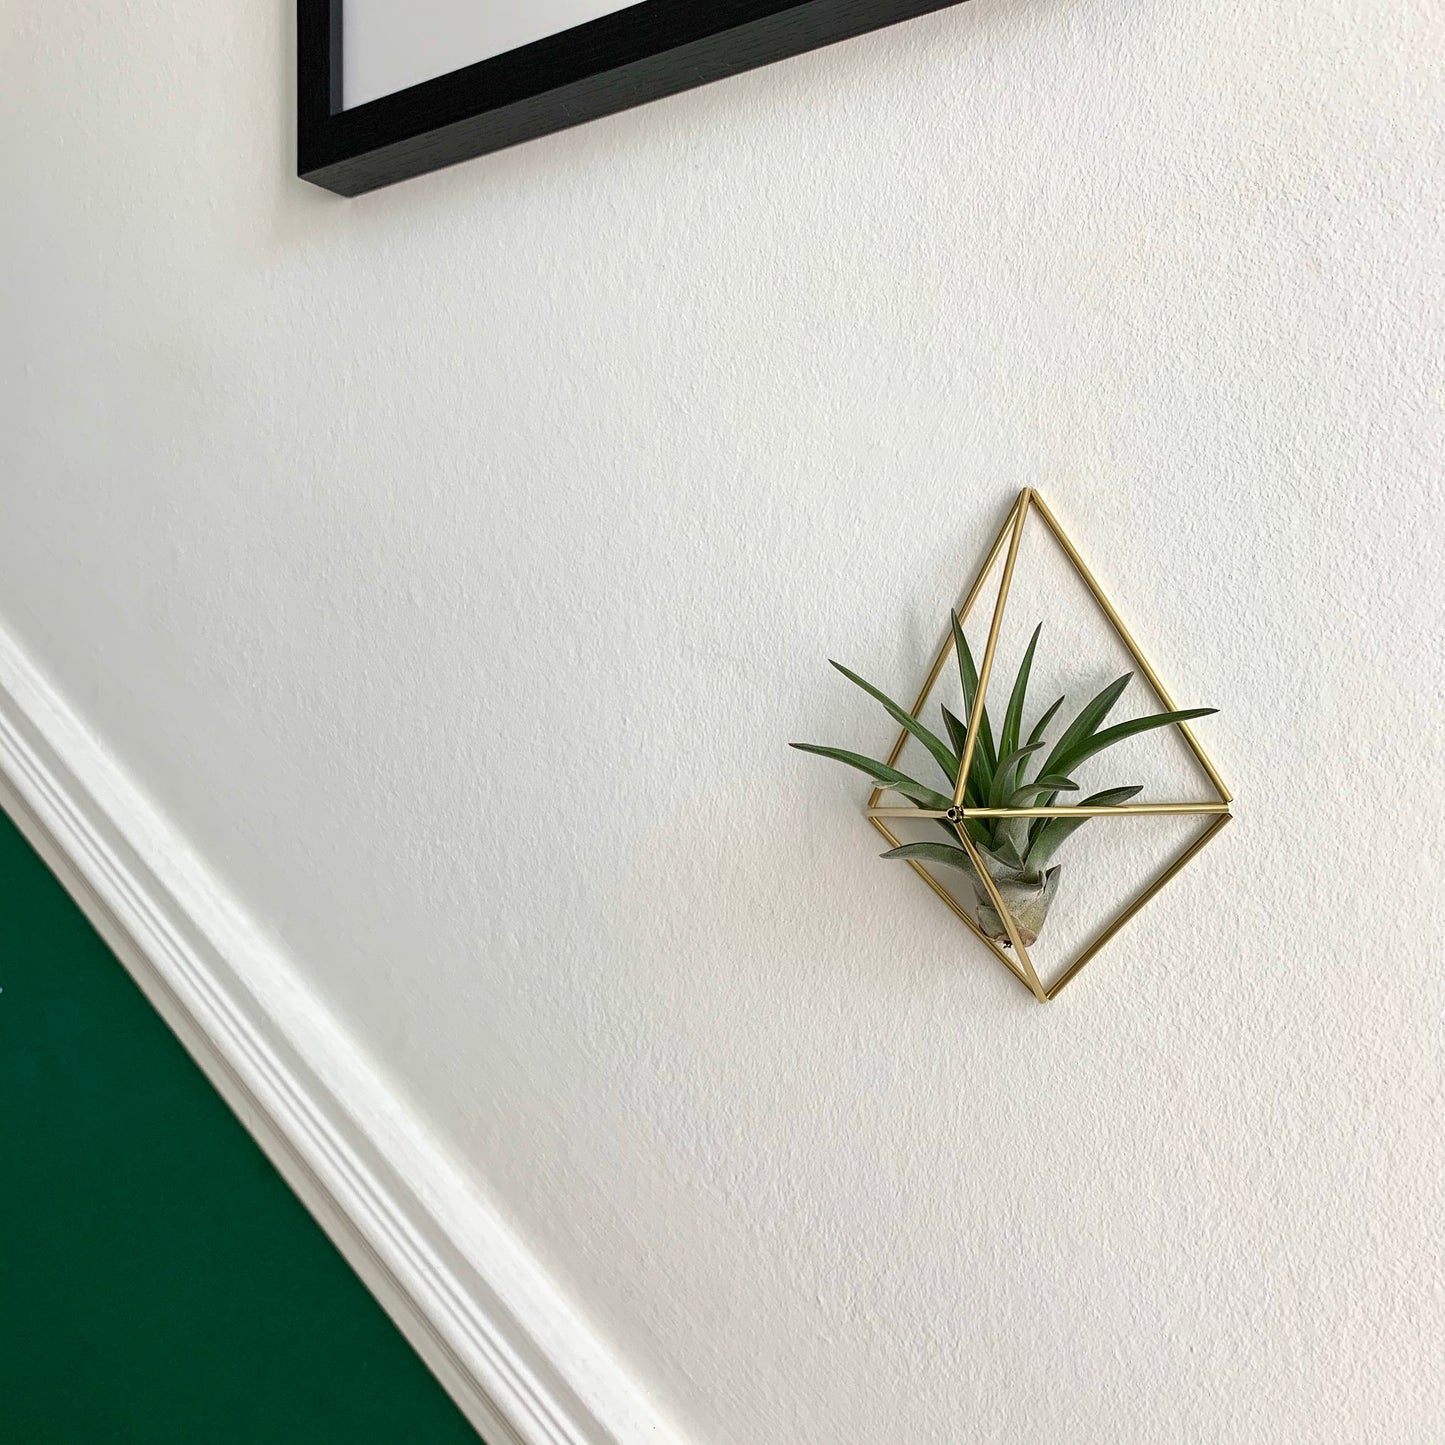 Small Air Plant Holder Wall Sconce (without plant)